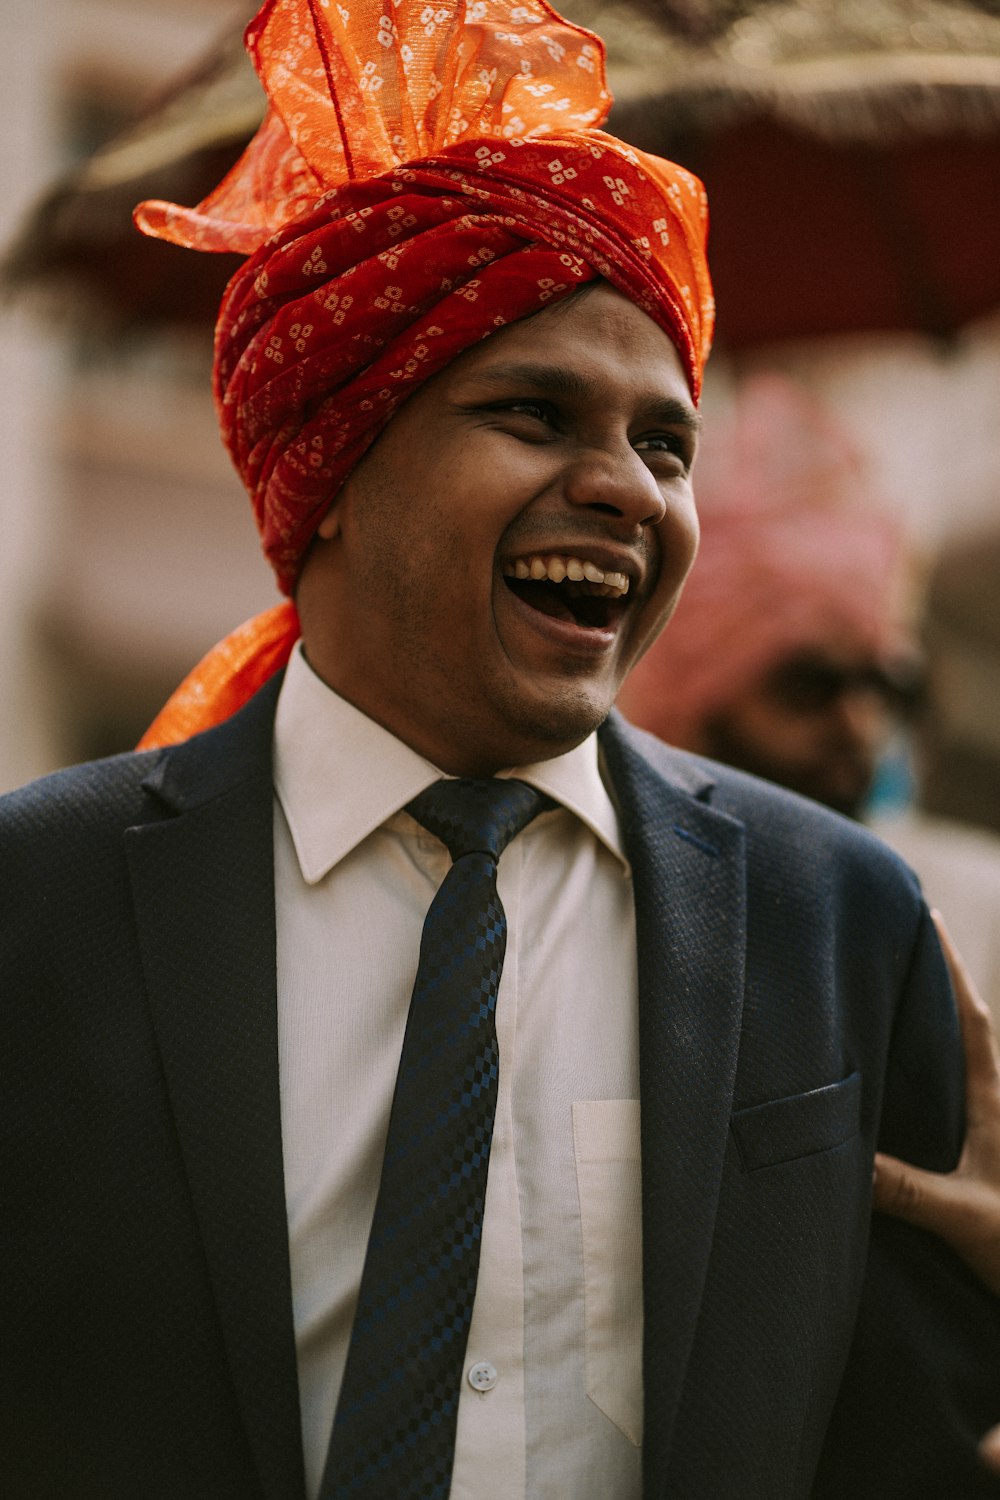 a man in a turban laughing and wearing a suit